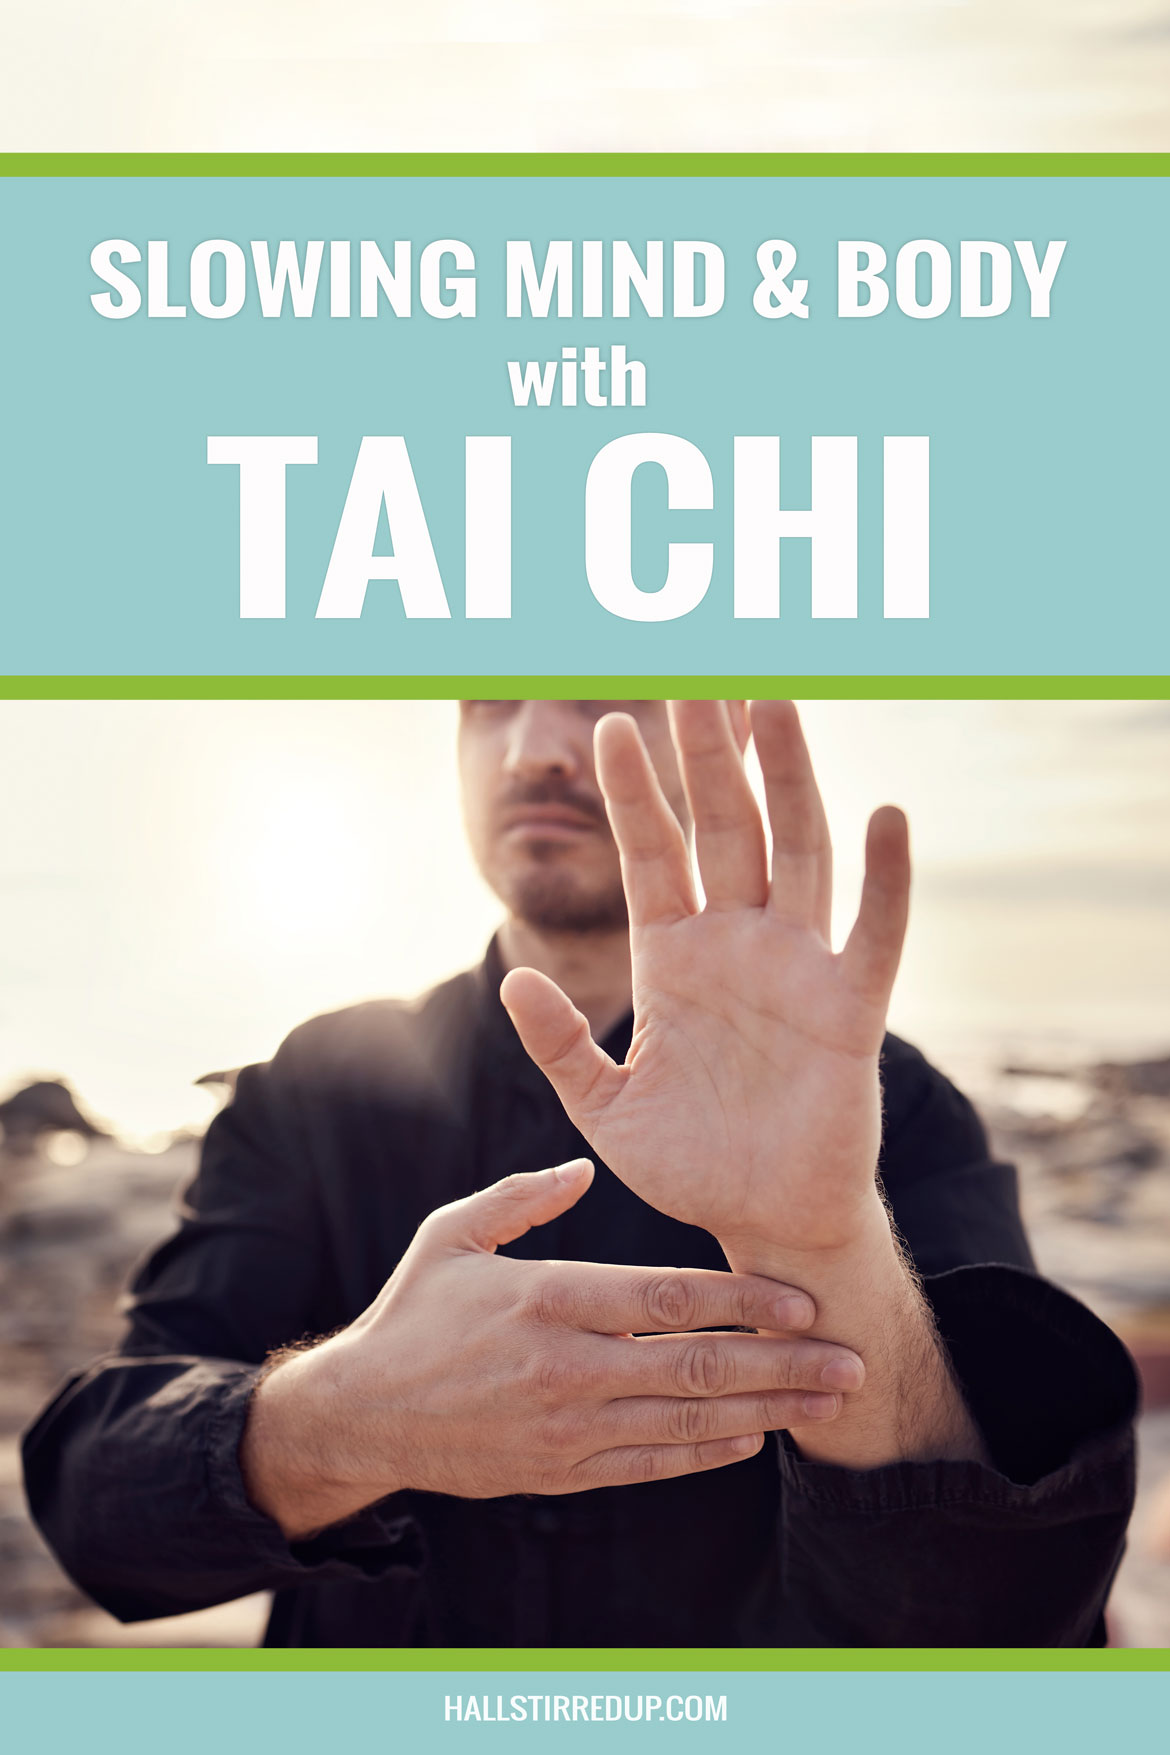 Slowing mind and body with Tai Chi